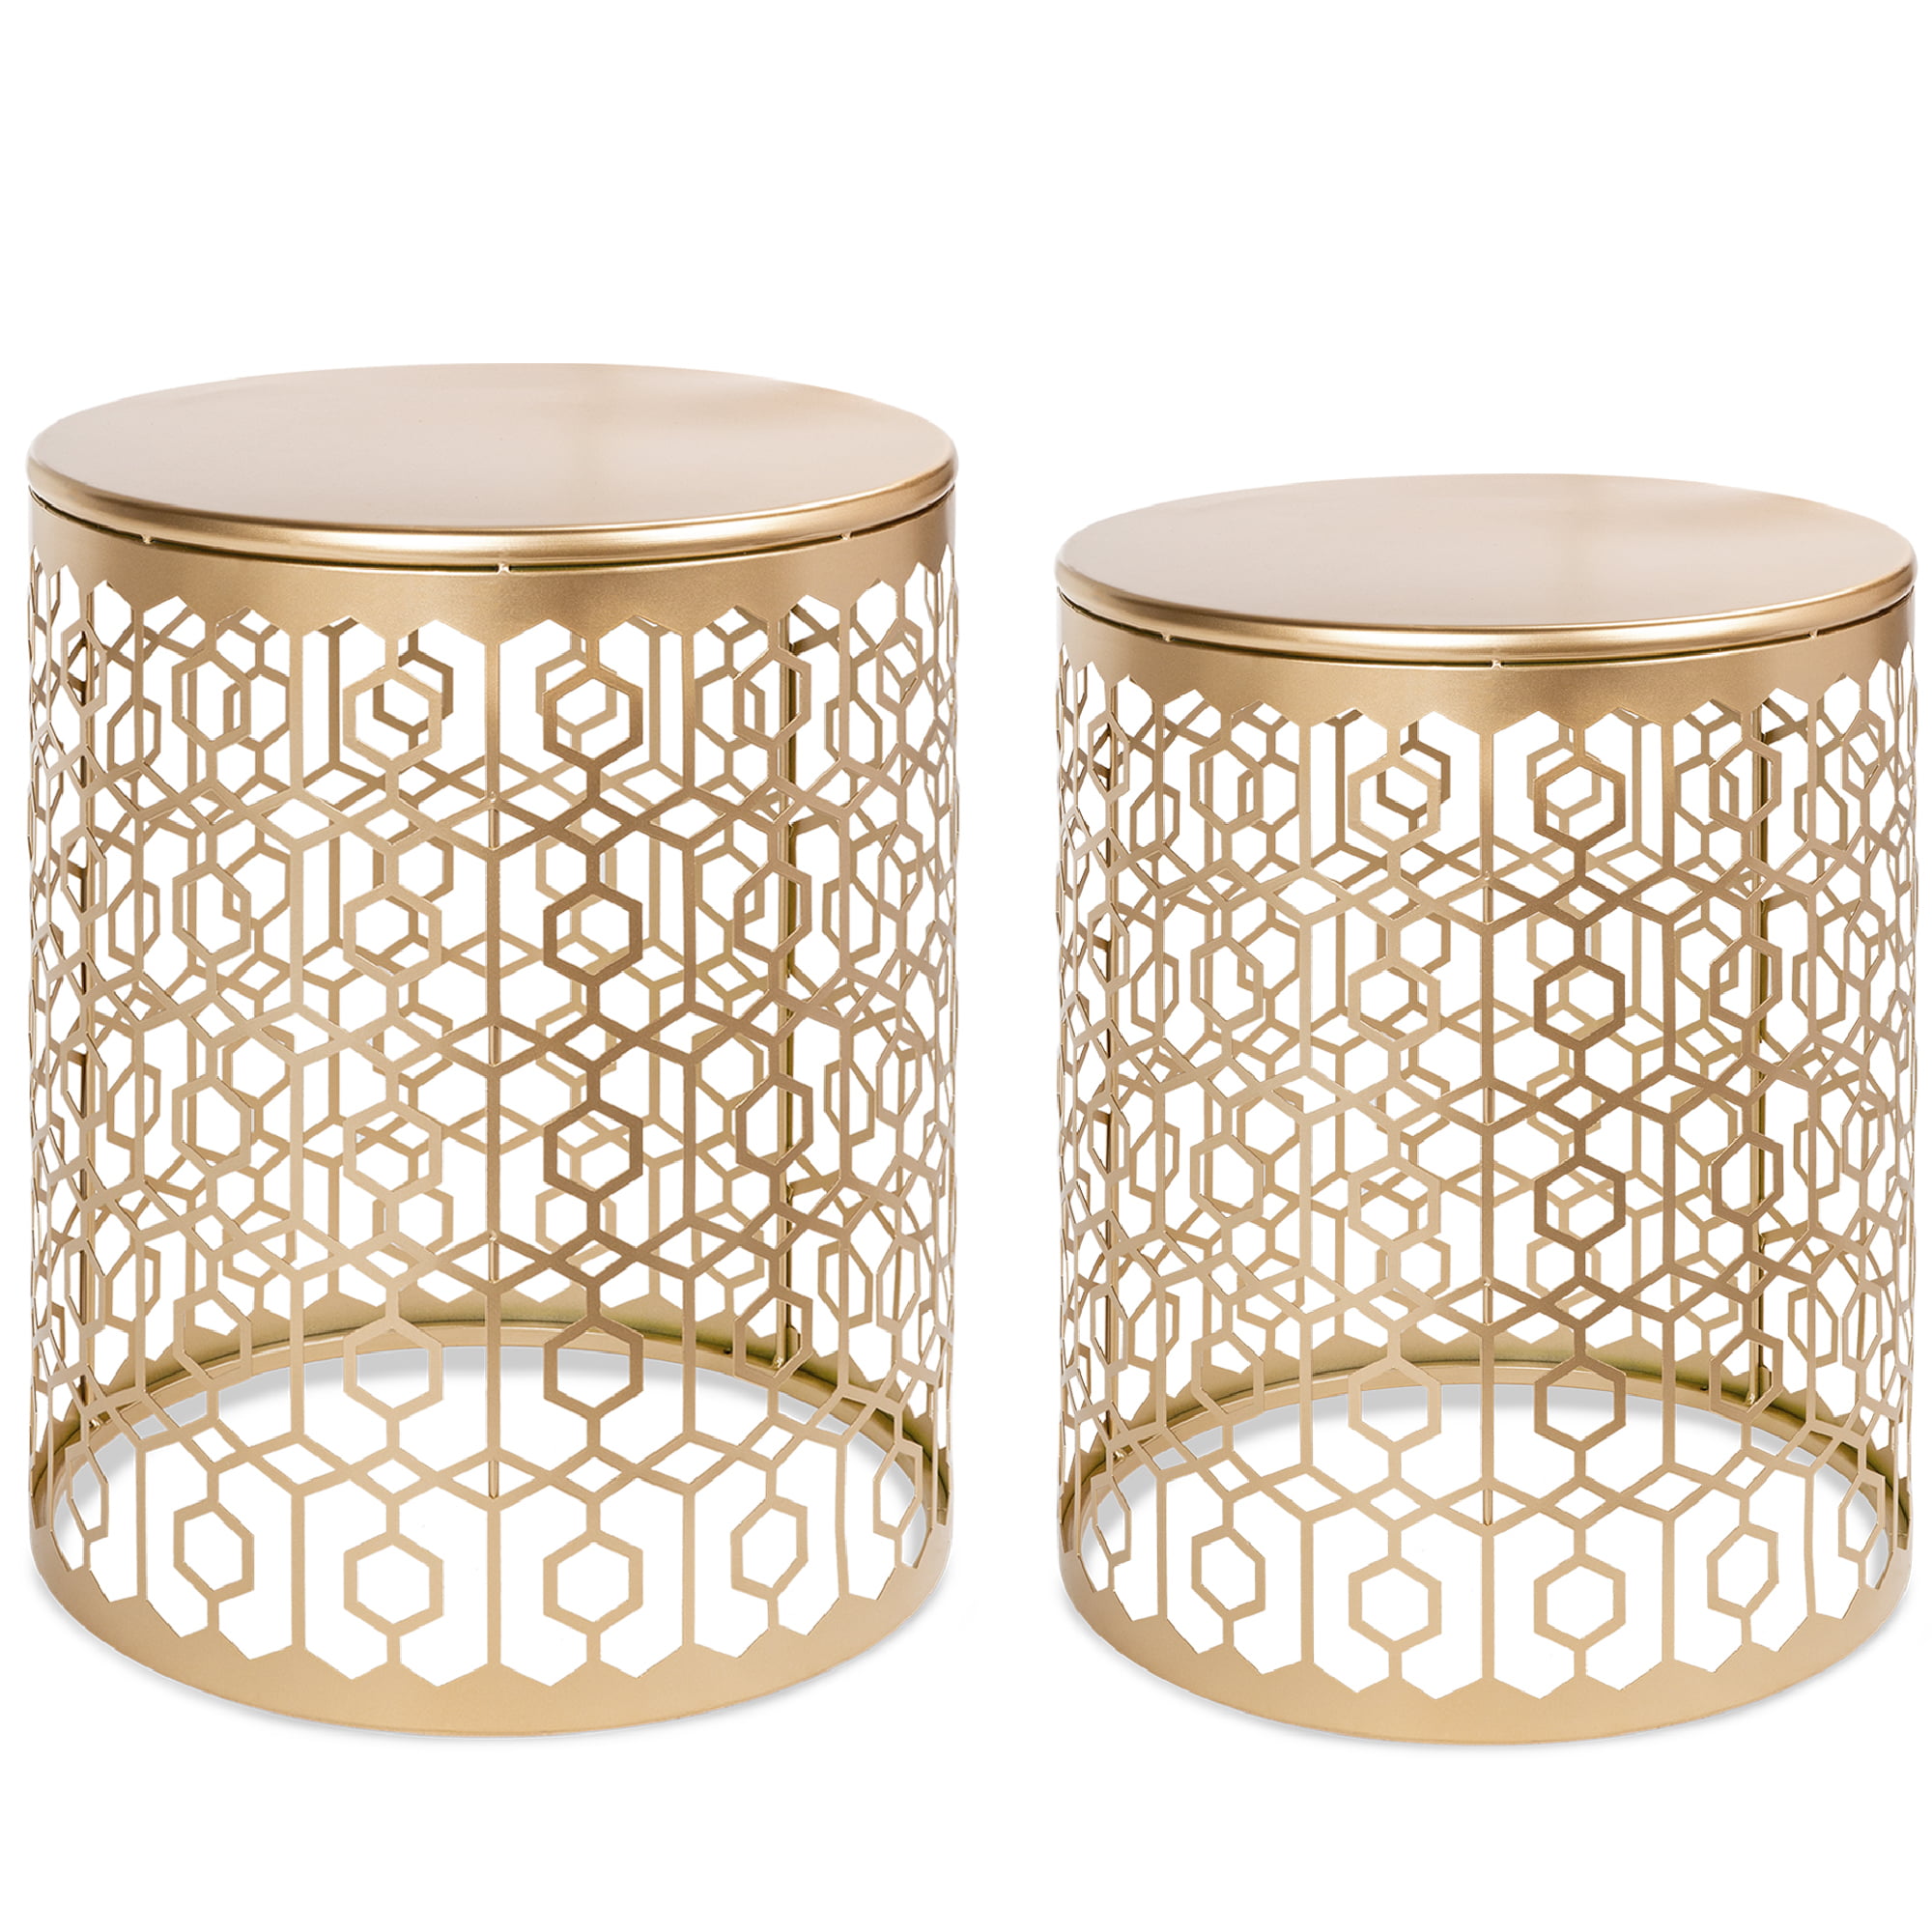 Best Choice Products Set of 2 Decorative Nesting Round Patterned Accent ...